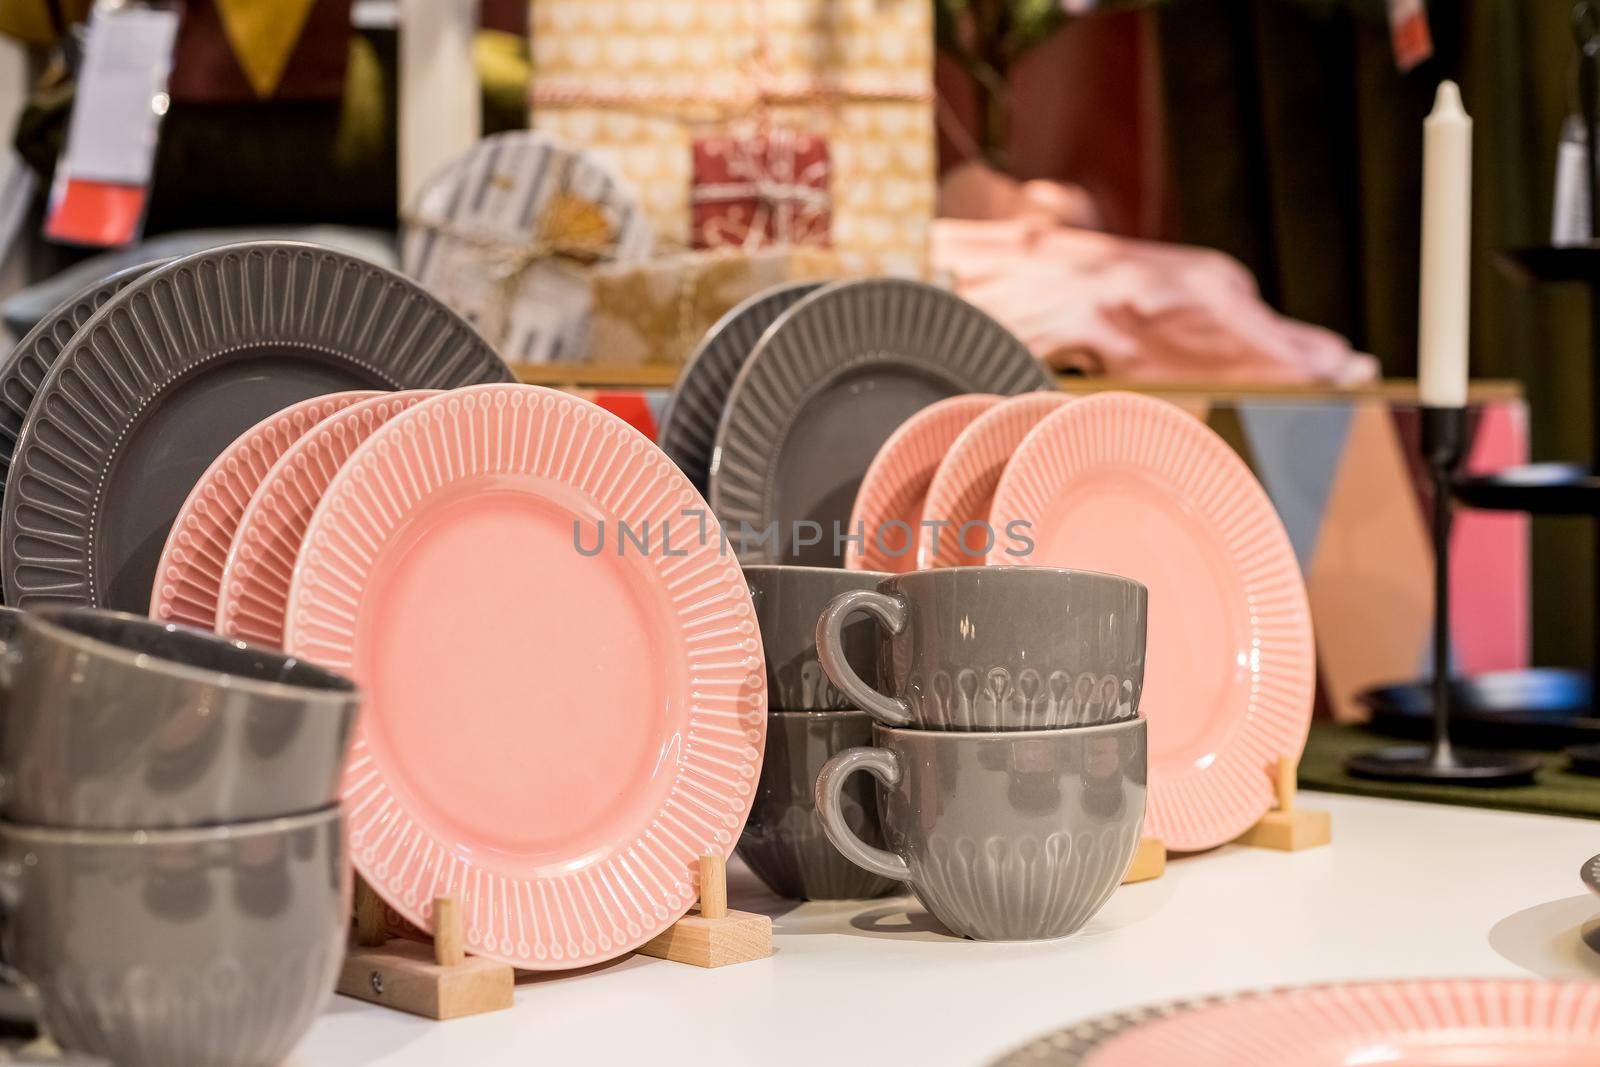 New gray, pink table setting . modern style. Serving for store catalog. Hot drinks tea or coffee. Stylish elegant ceramic dishware on shop shelves,Various kitchen utensils.Tender, pastel color by YuliaYaspe1979